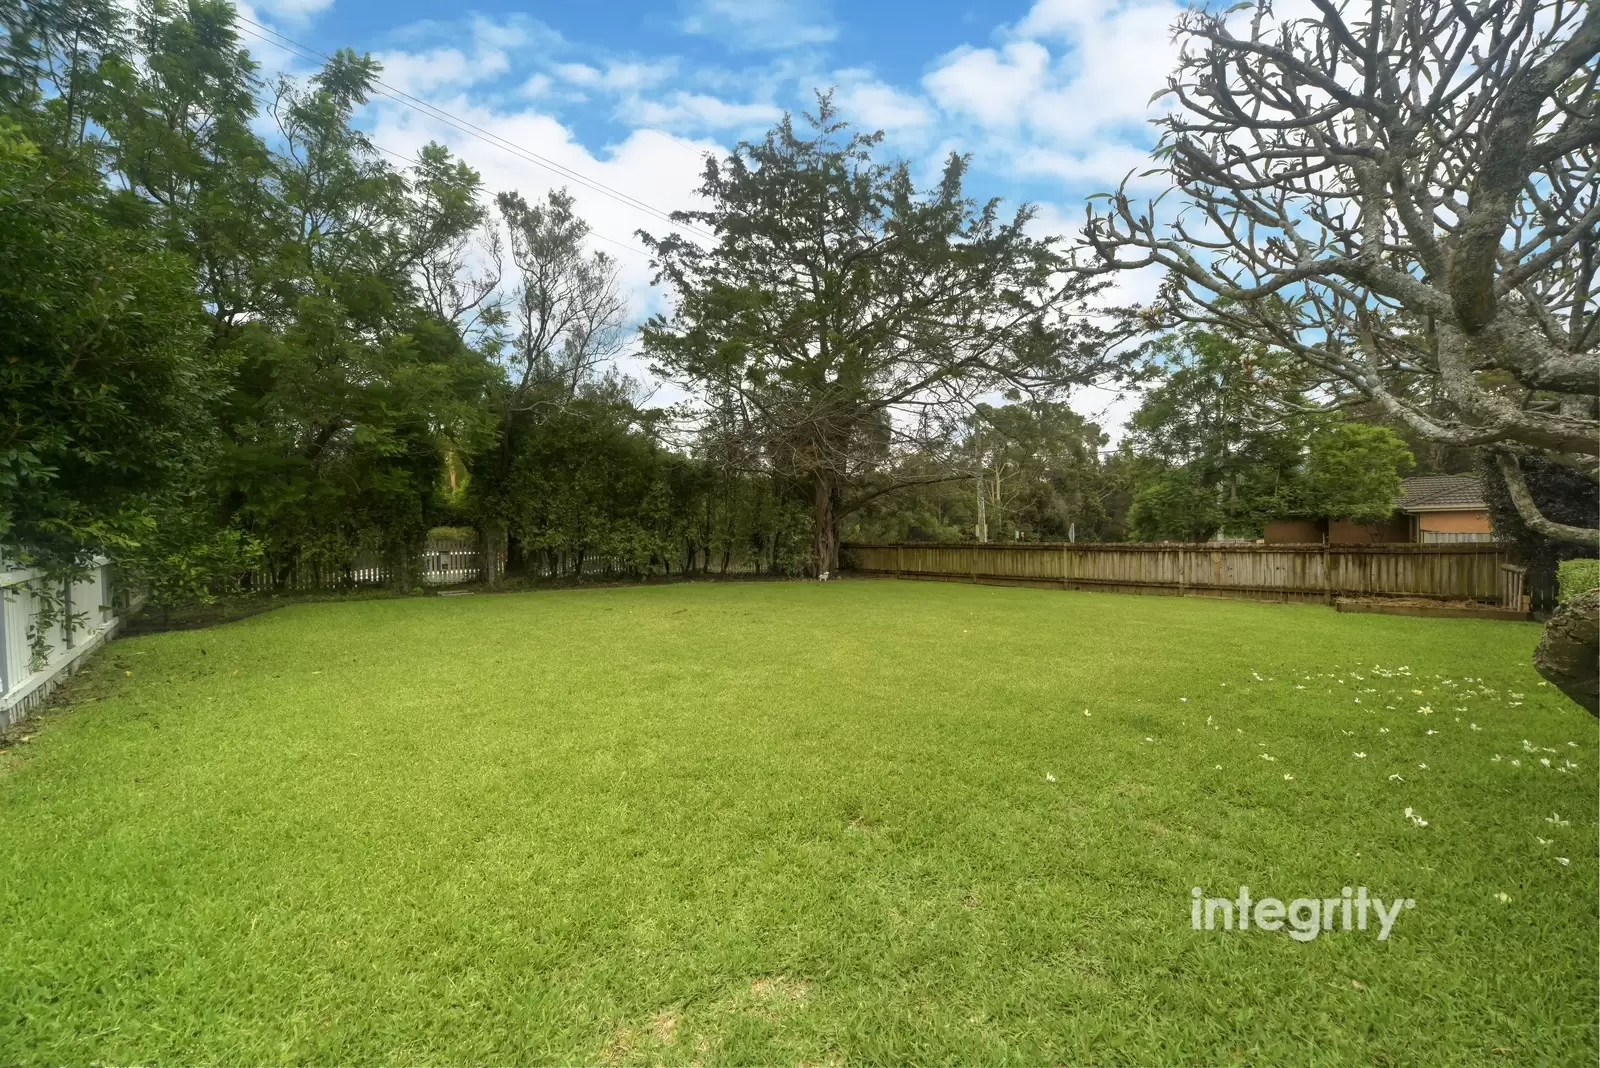 68 Pitt Street, North Nowra Sold by Integrity Real Estate - image 1